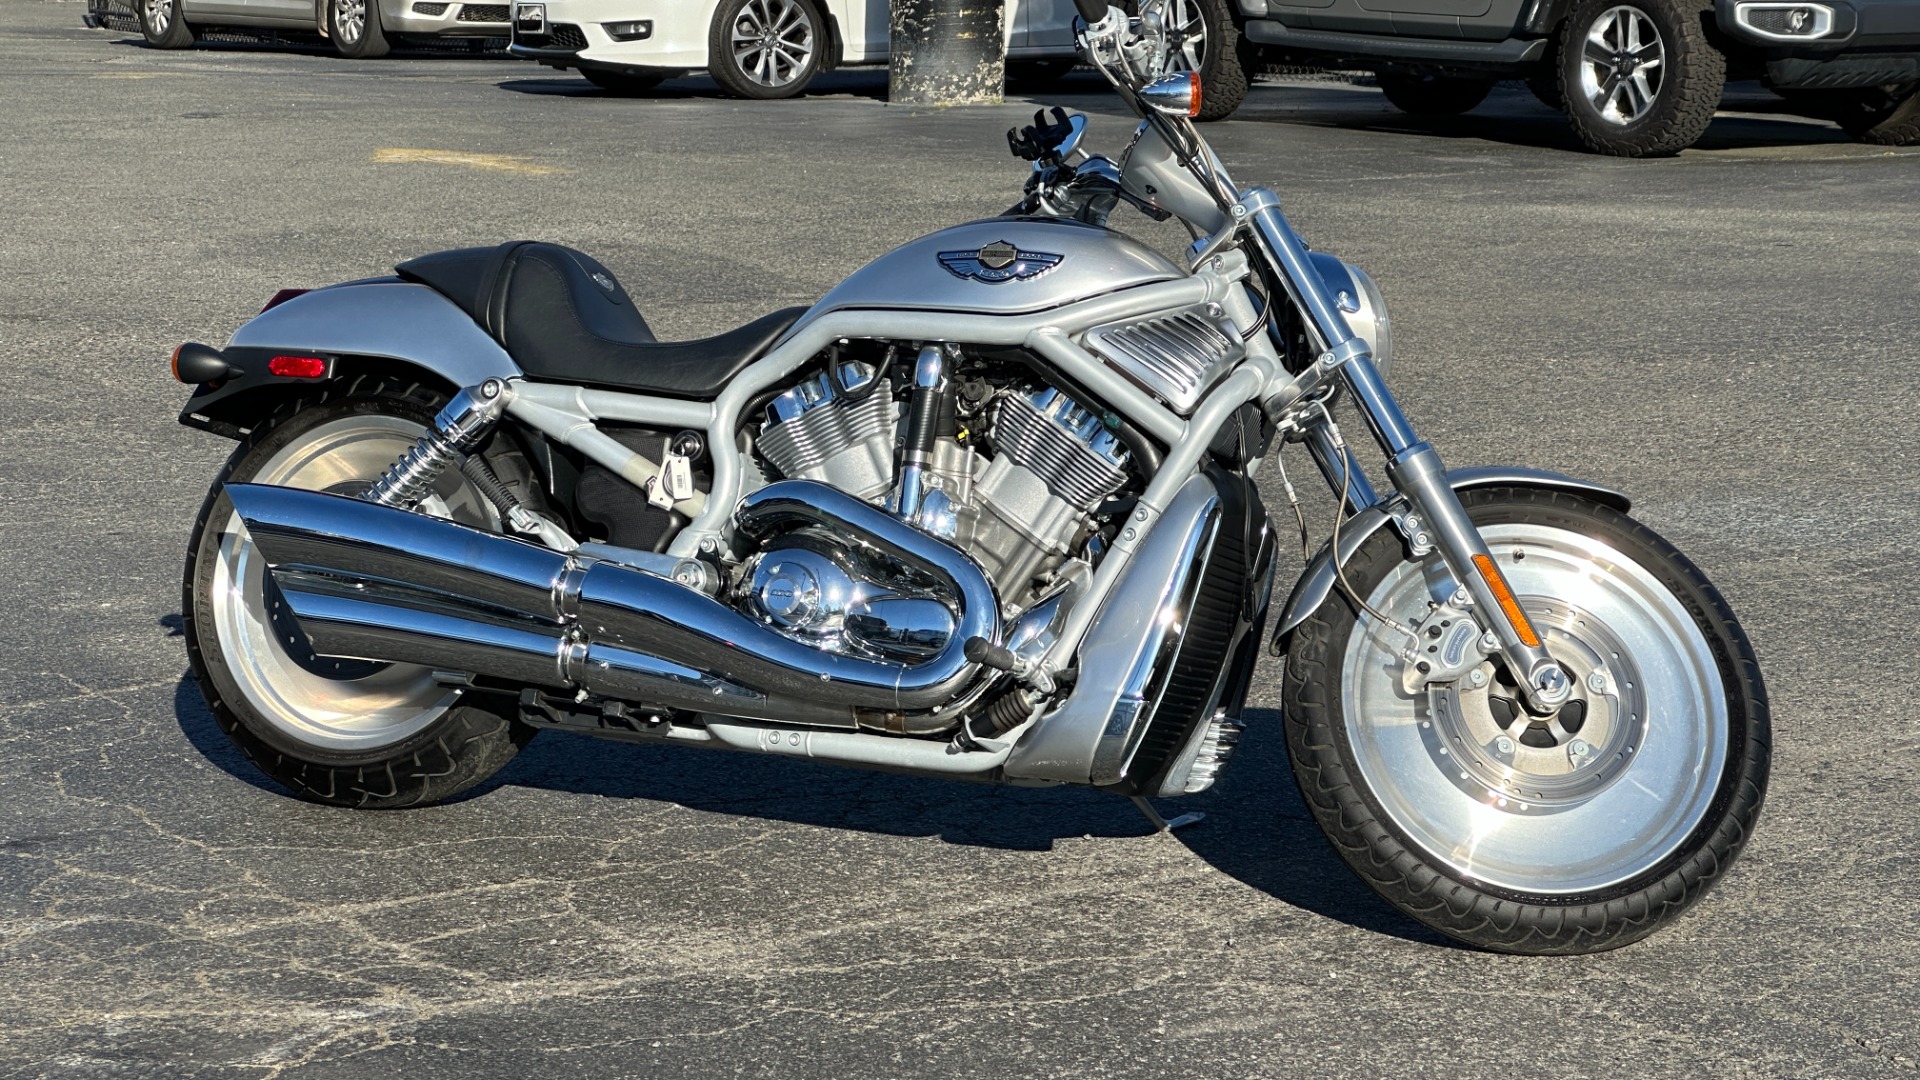 Used 2003 Harley Davidson V Rod ANNIVERSARY EDITION / 1130CC ENGINE / BREMBO BRAKES / VORTEX AIR SCOOPS for sale $7,695 at Formula Imports in Charlotte NC 28227 62